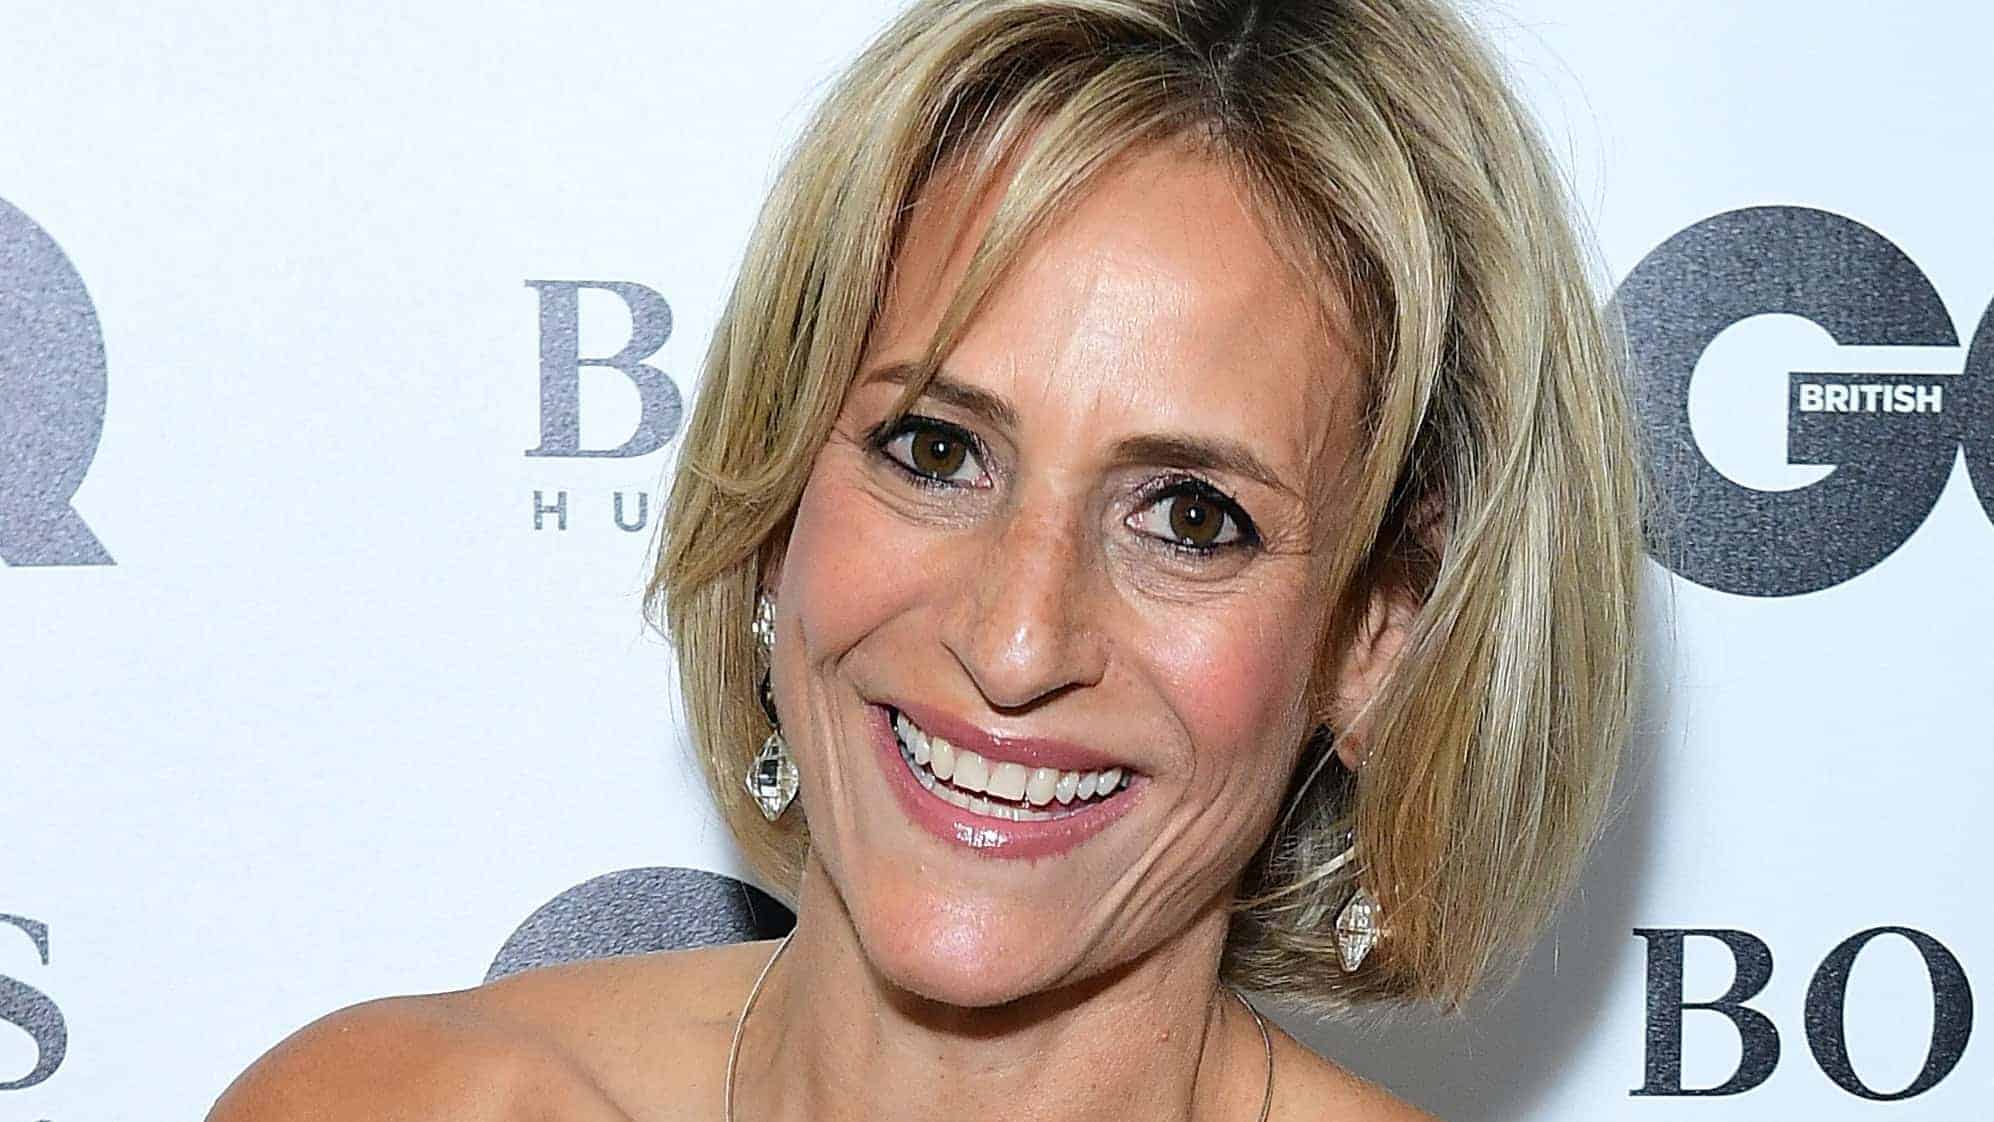 Emily Maitlis: Dominic Cummings texted me after Newsnight monologue